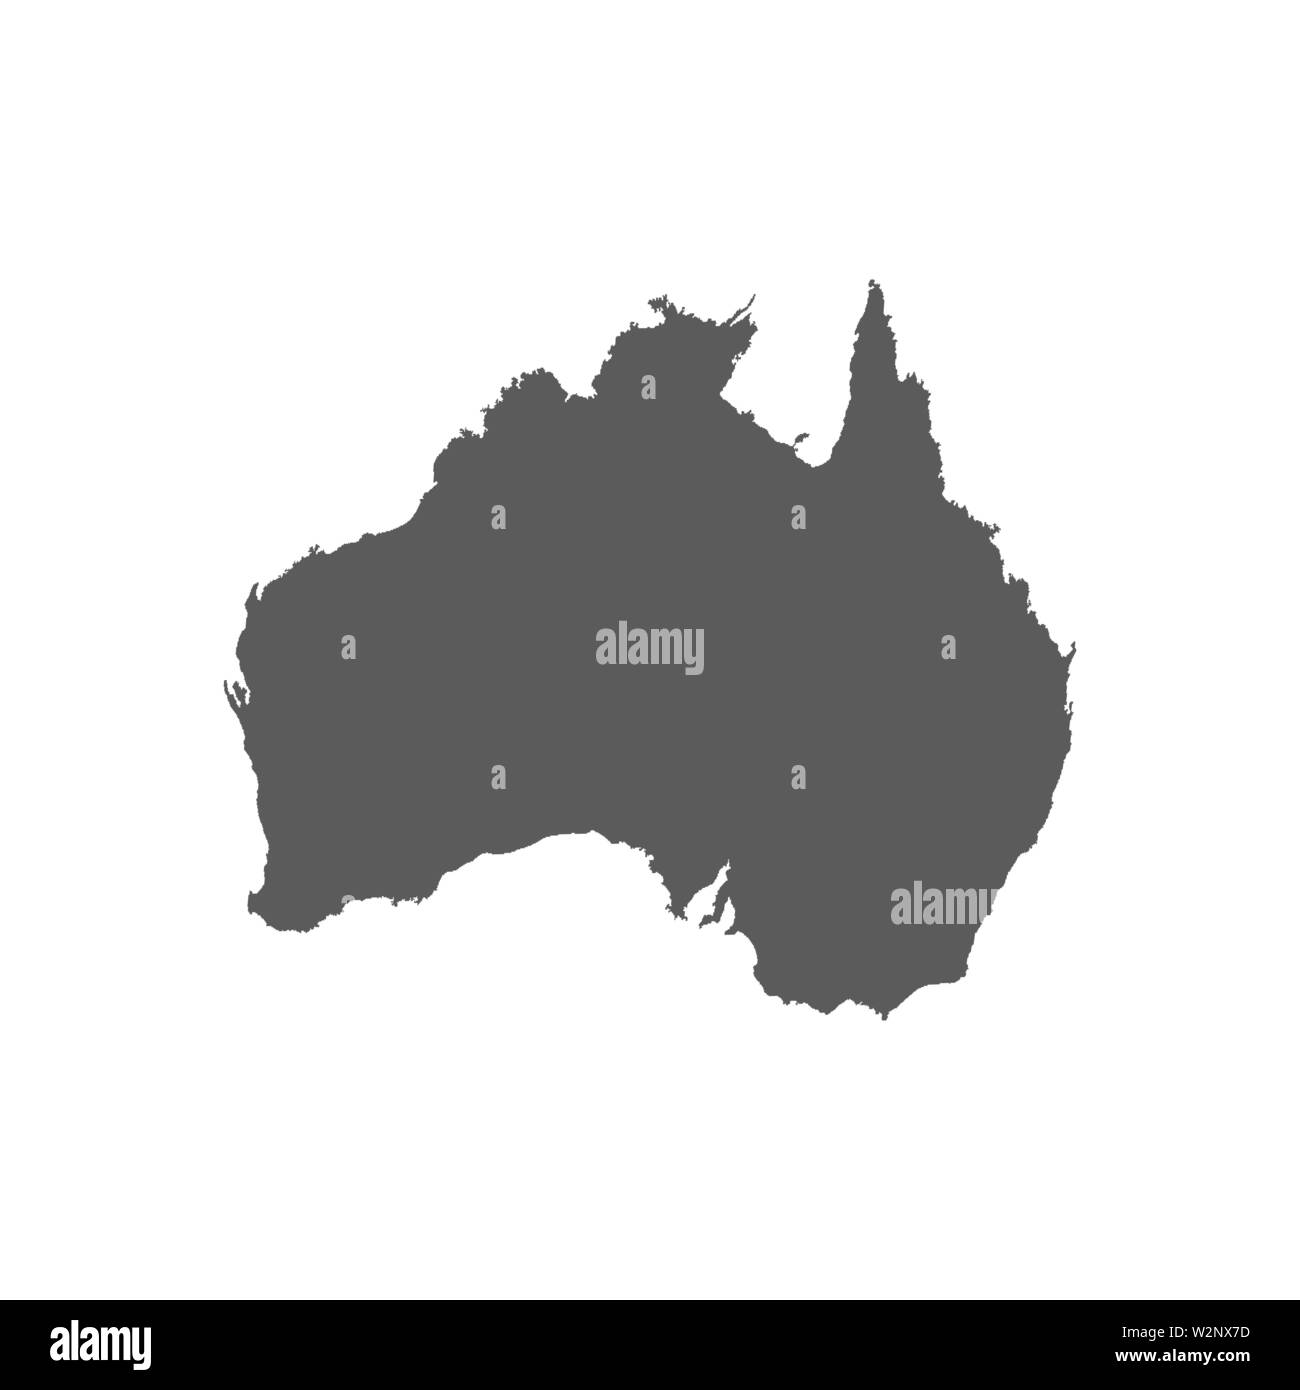 Australia vector map isolated on white background Stock Vector